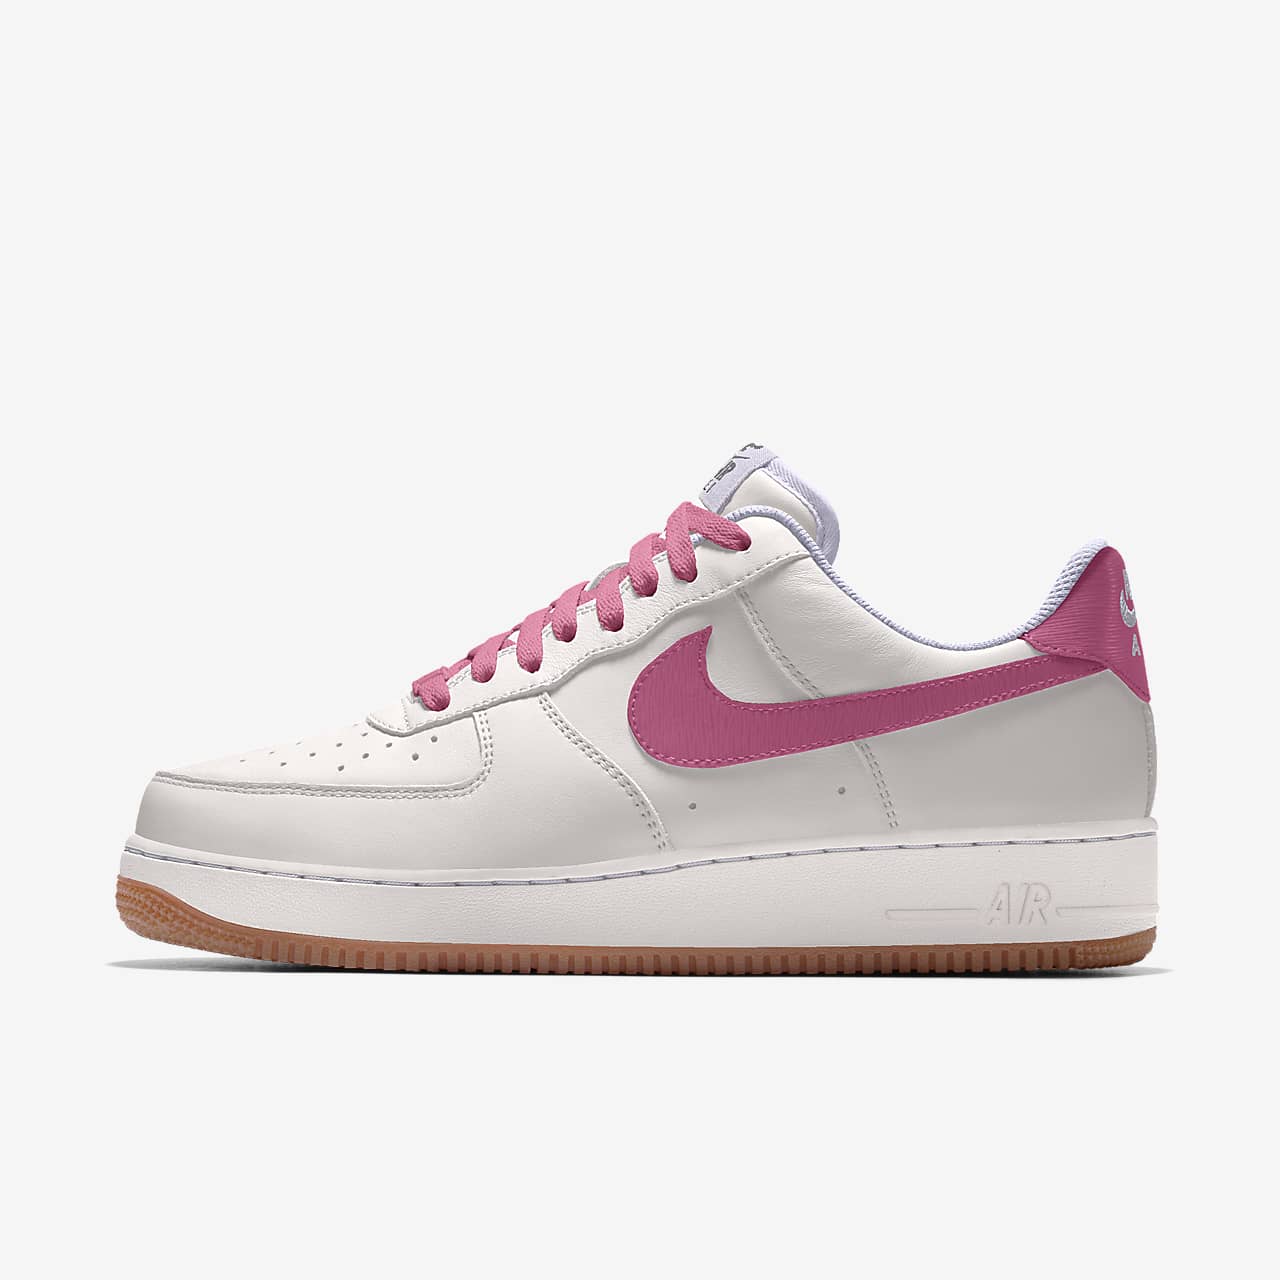 Chaussure personnalisable Nike Air Force 1 Low By You pour Femme